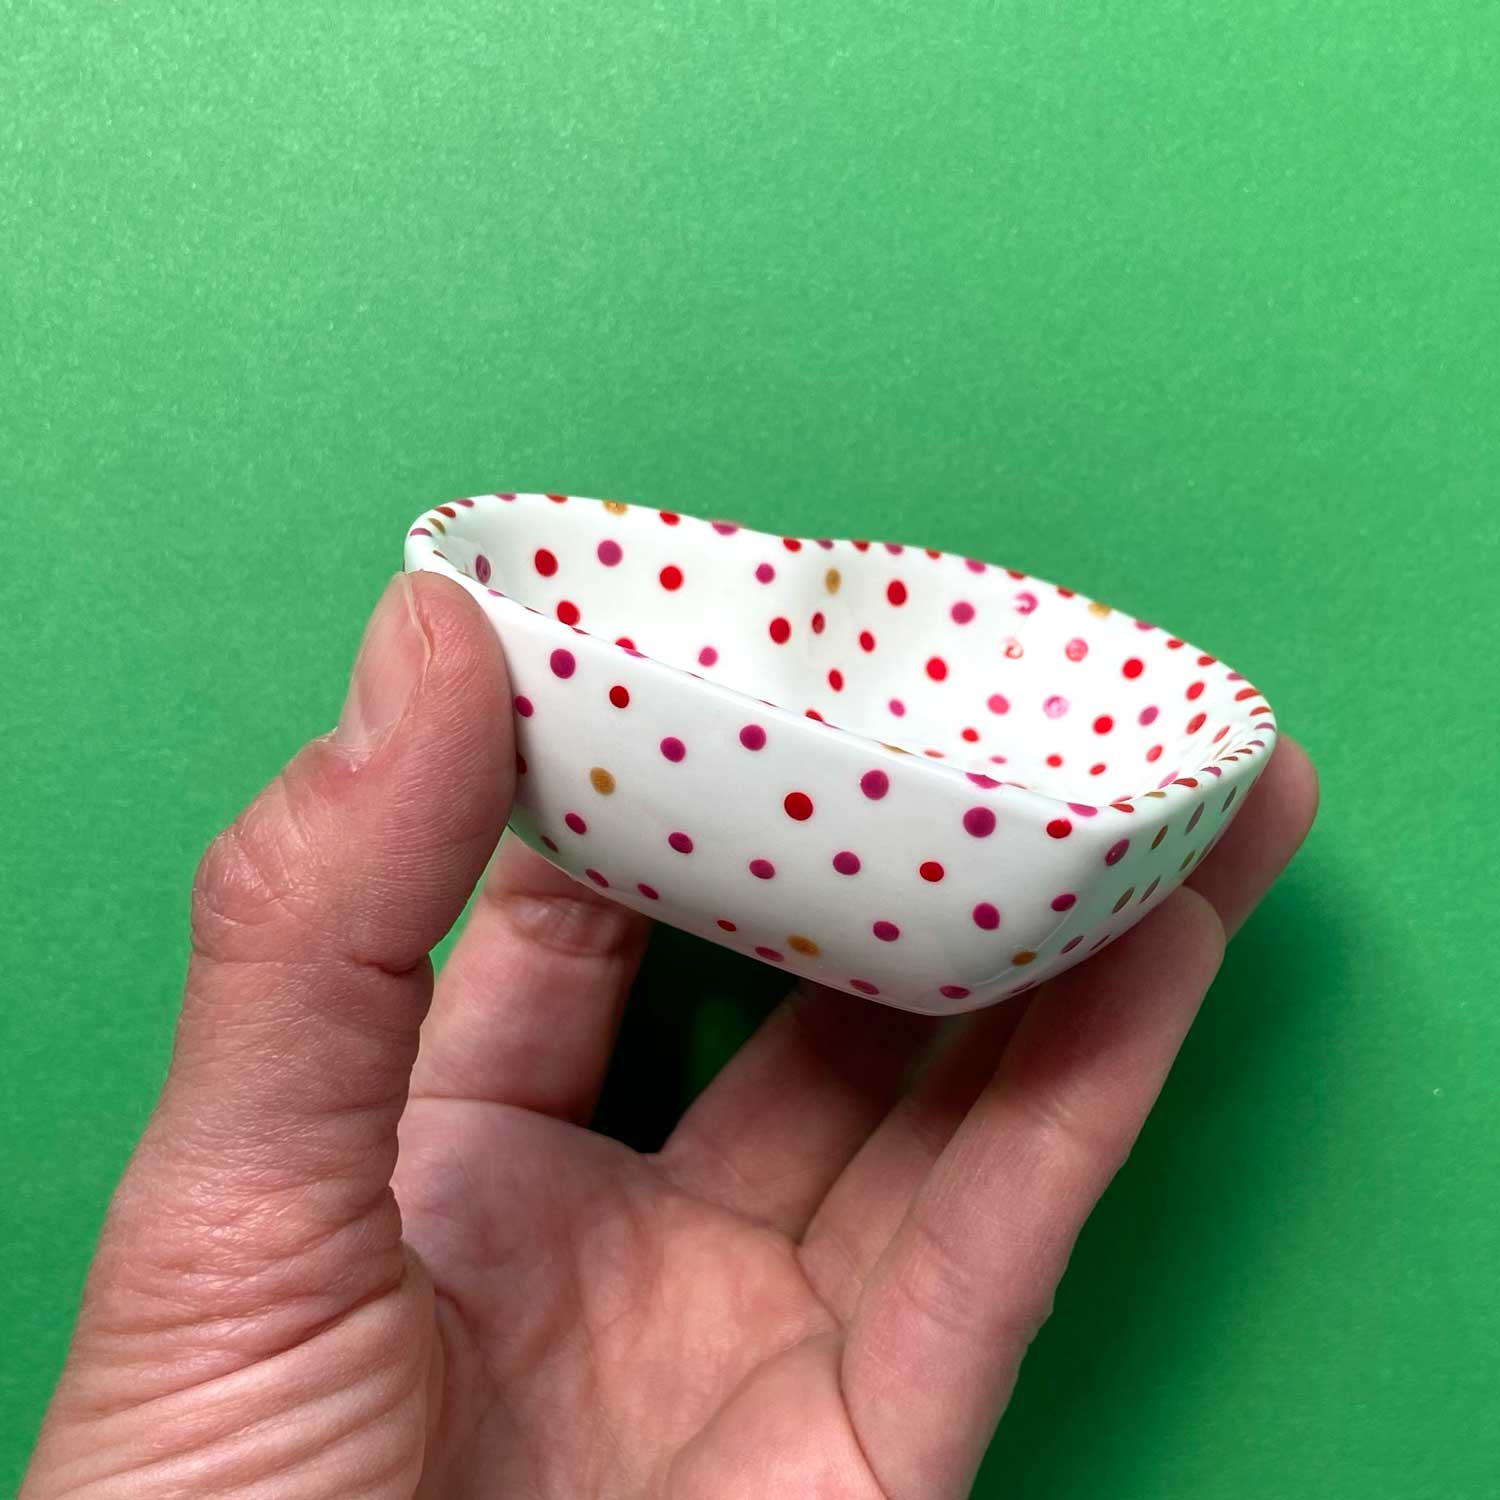 Gold, Red, and Pink Dots - Hand Painted Porcelain Heart Bowl